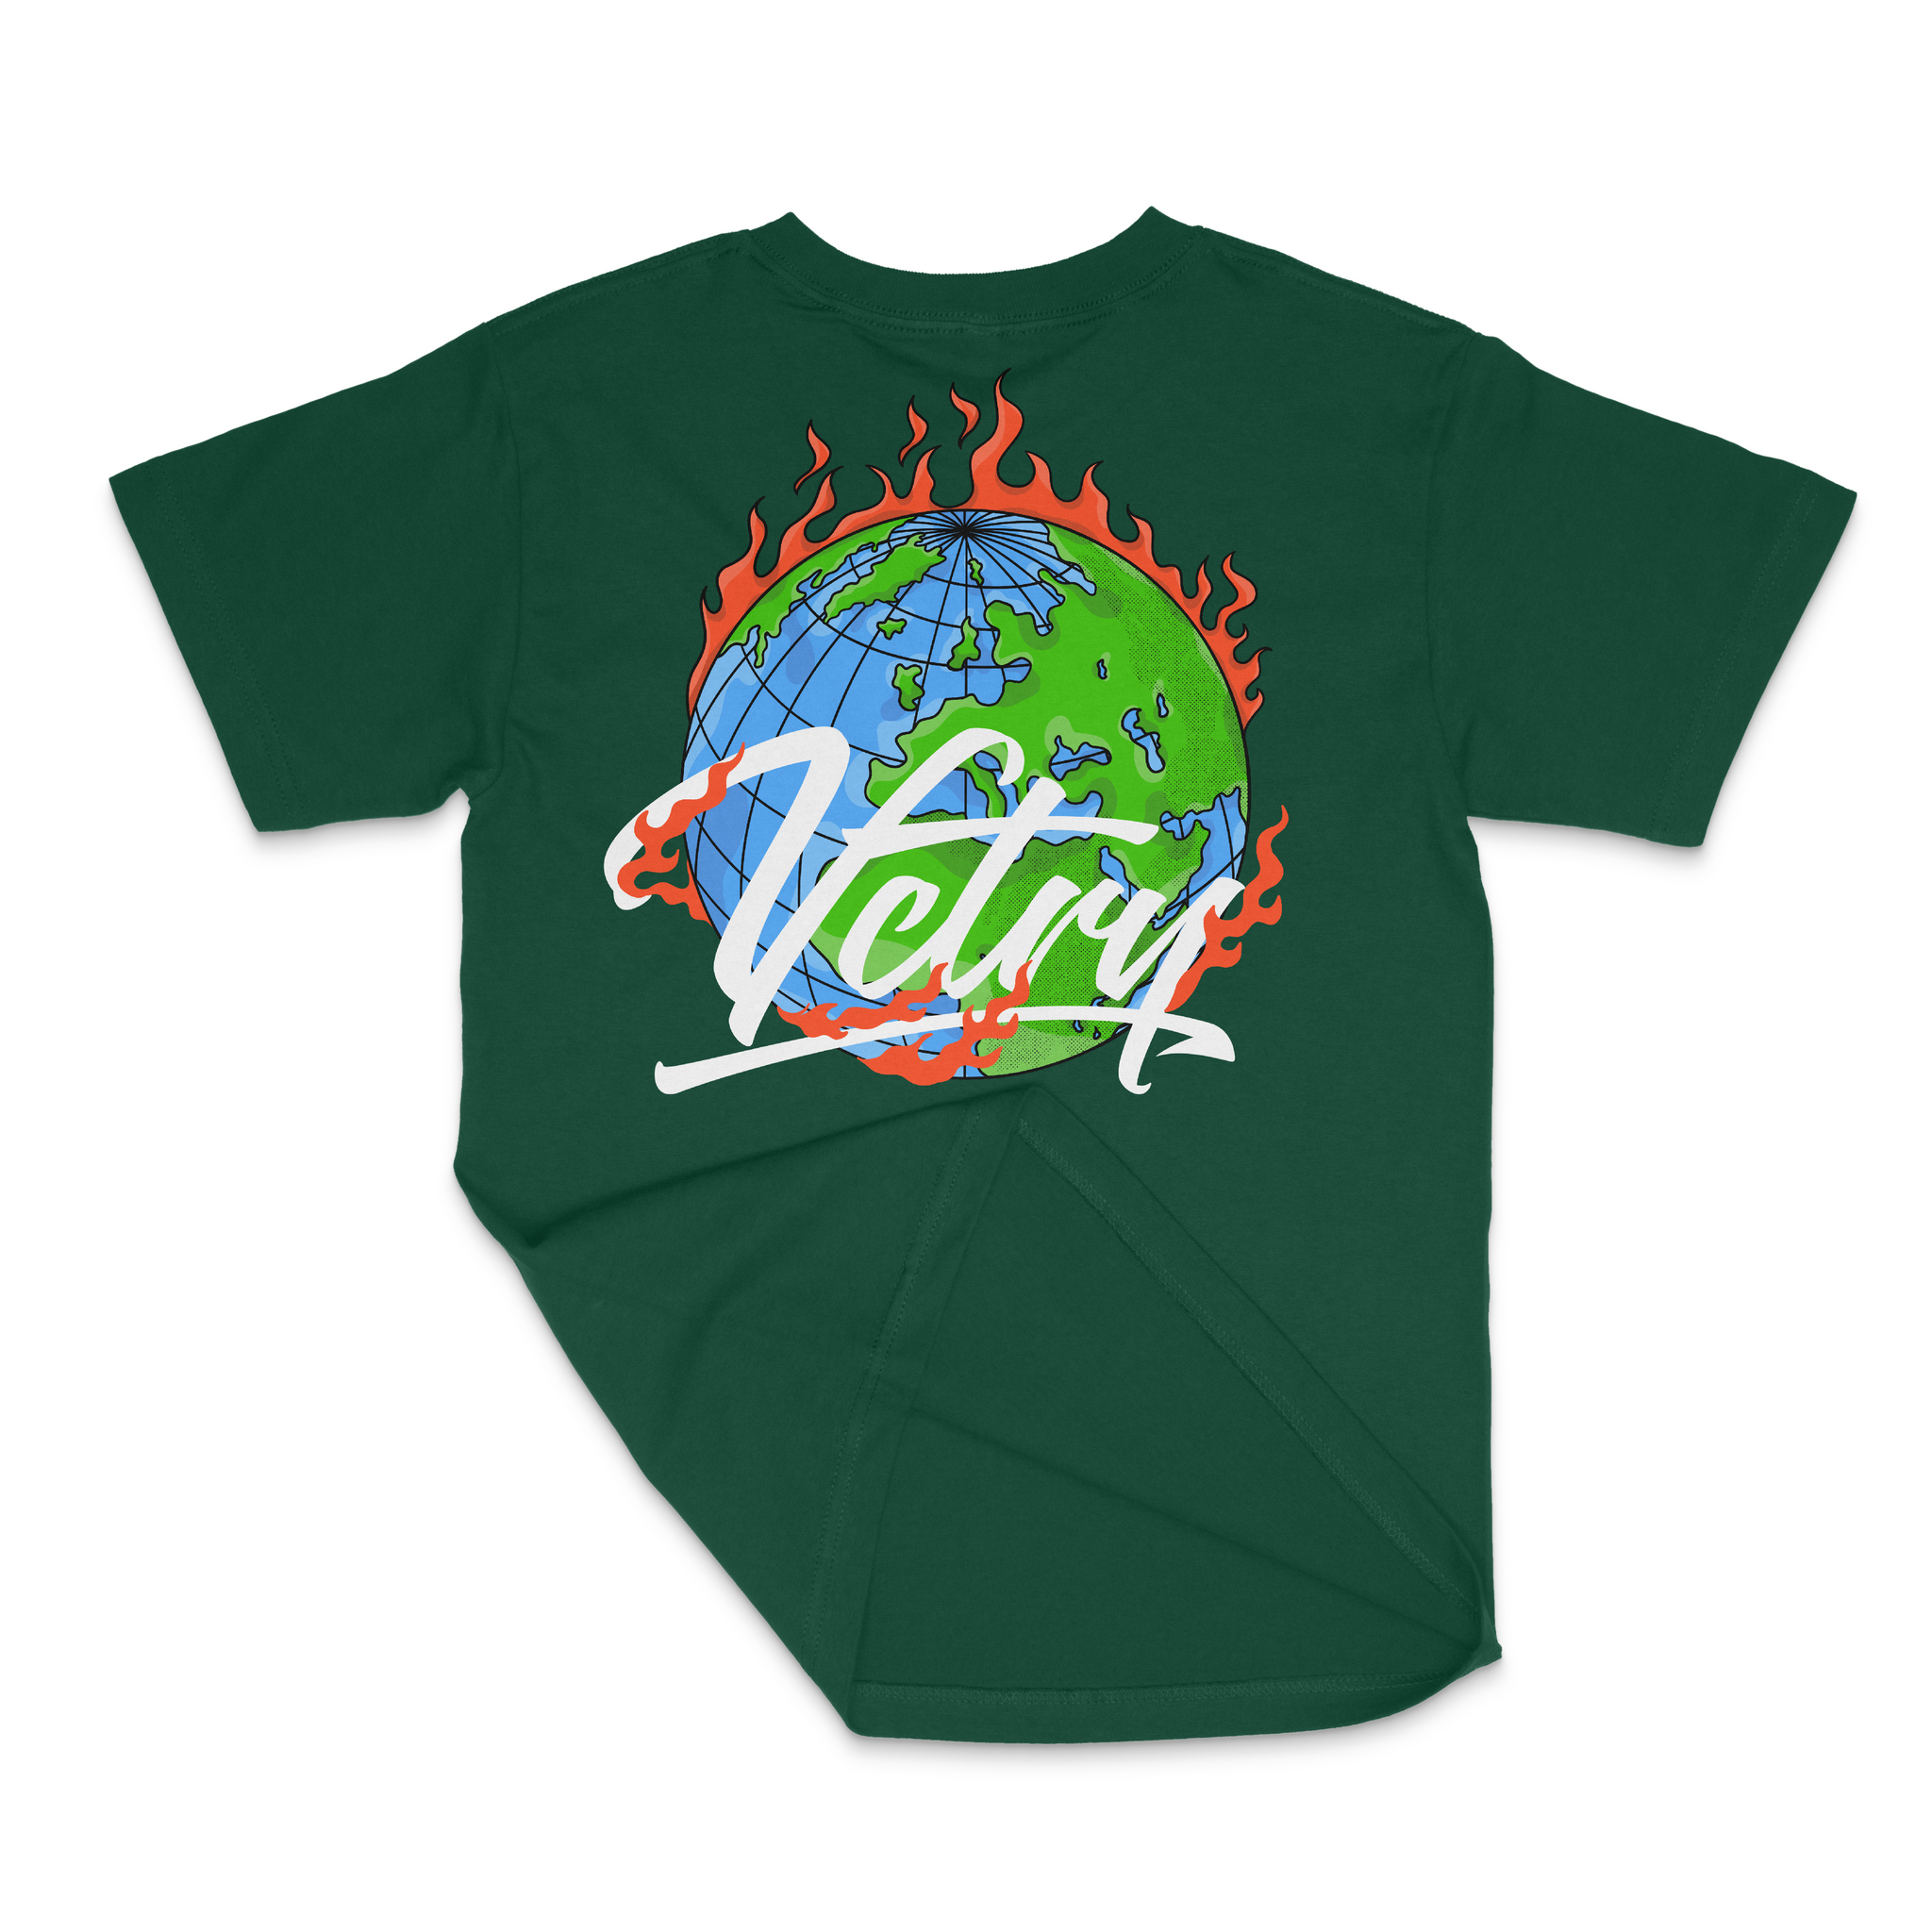 VCTRY World Tee